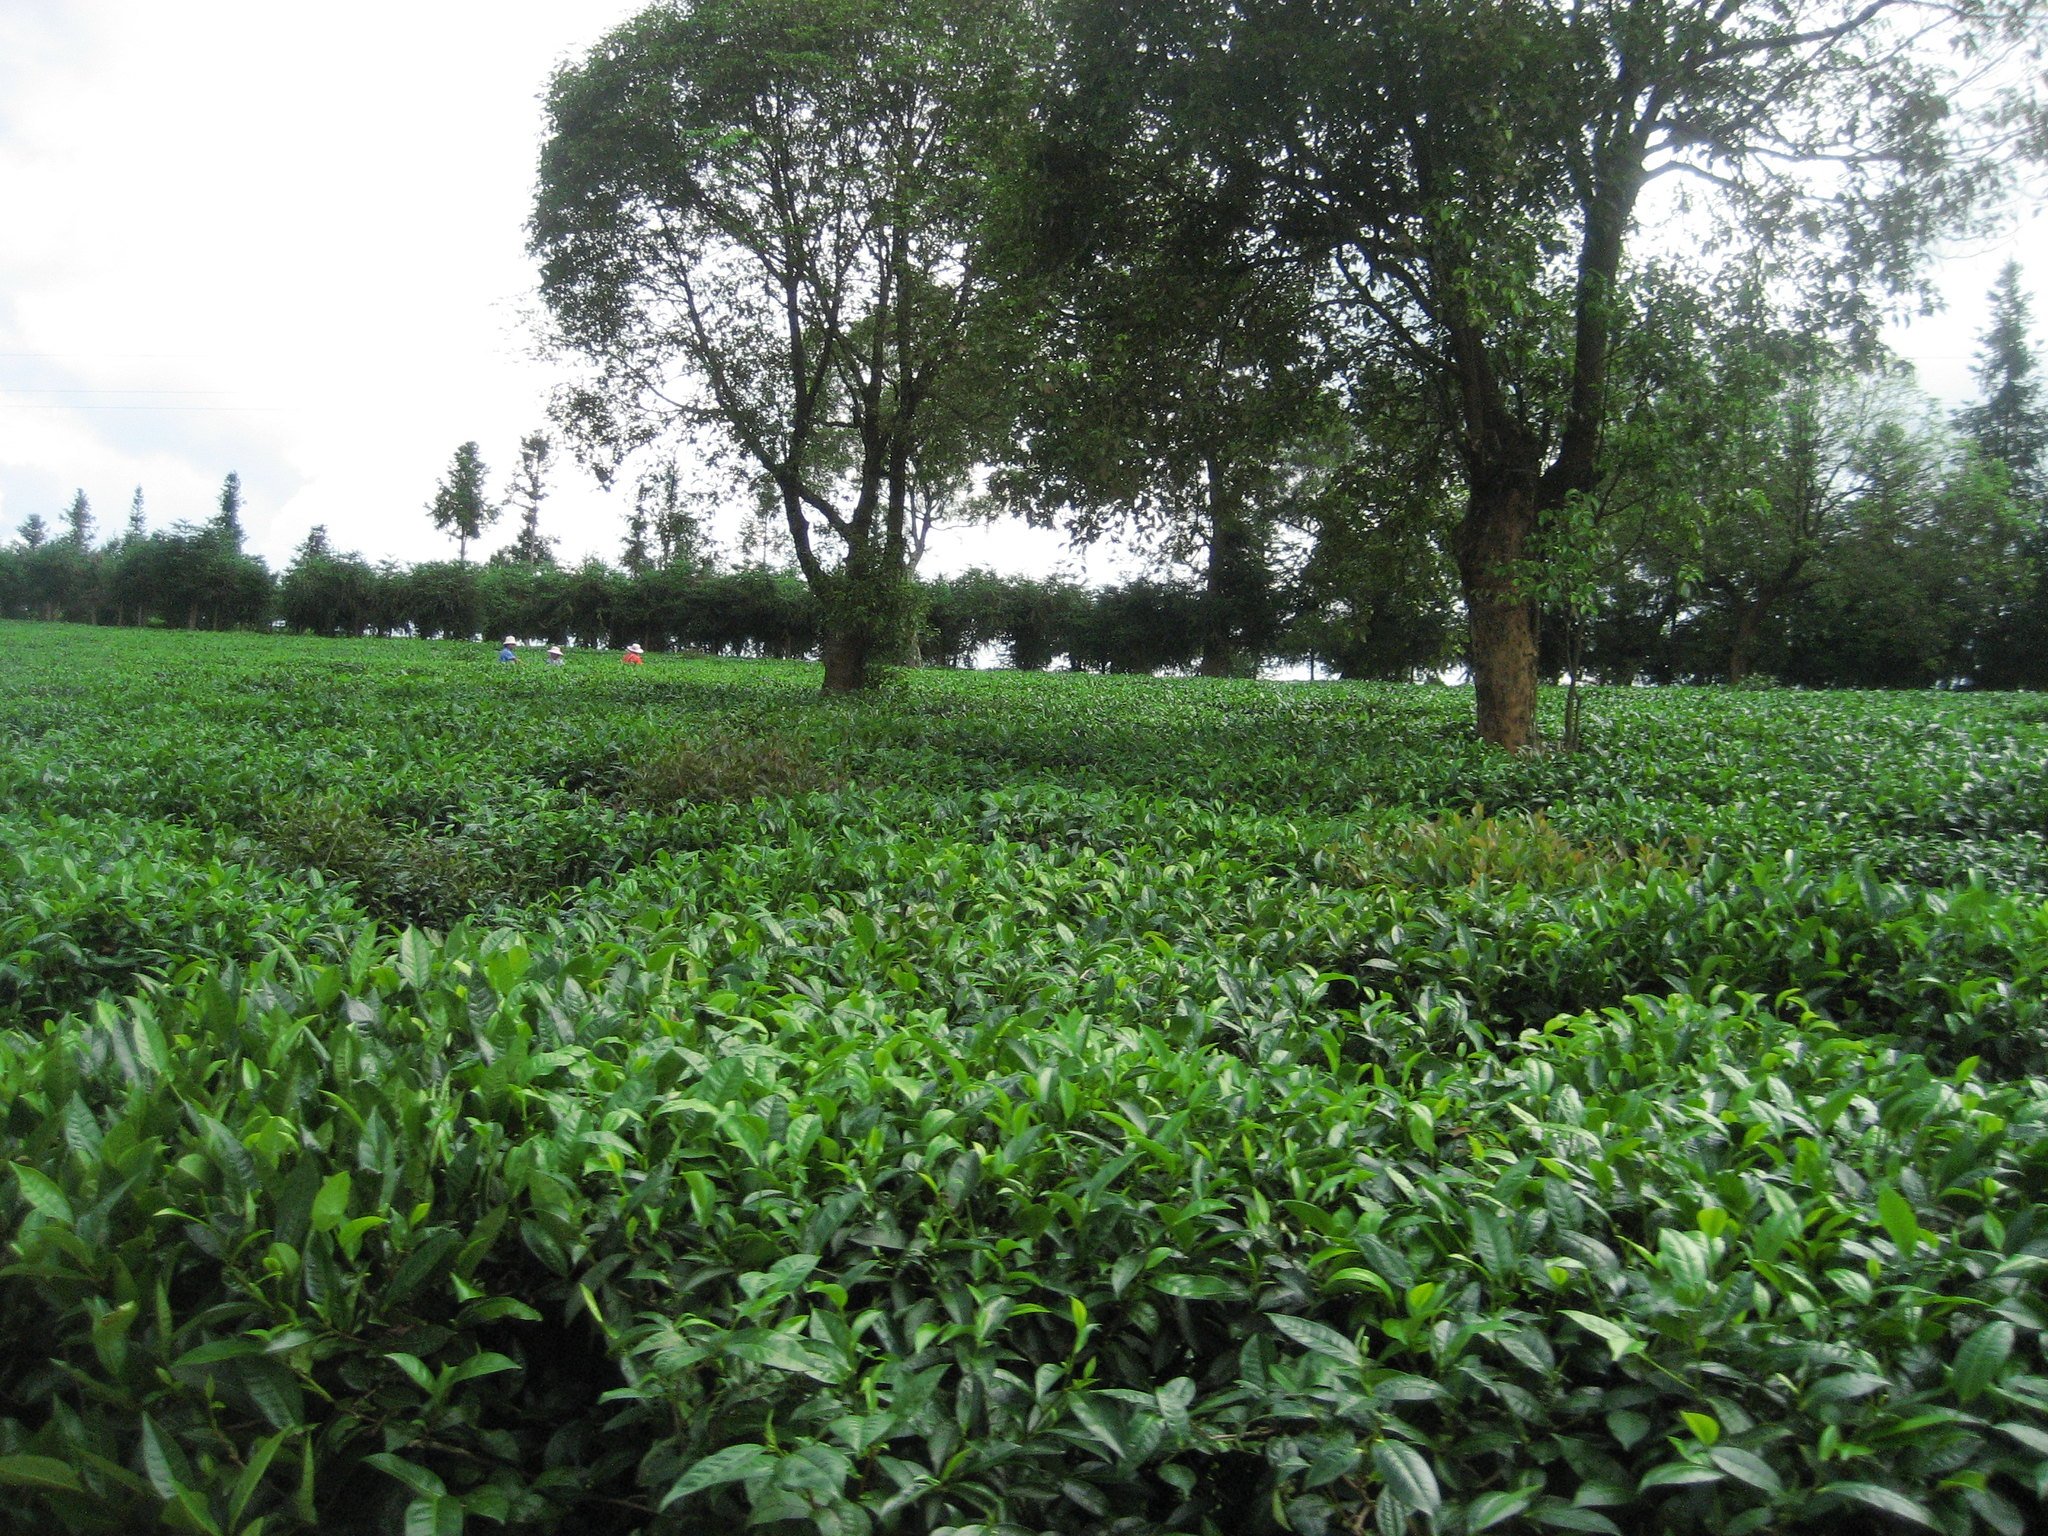 More Tea Cultivated at the Tea Research Institute